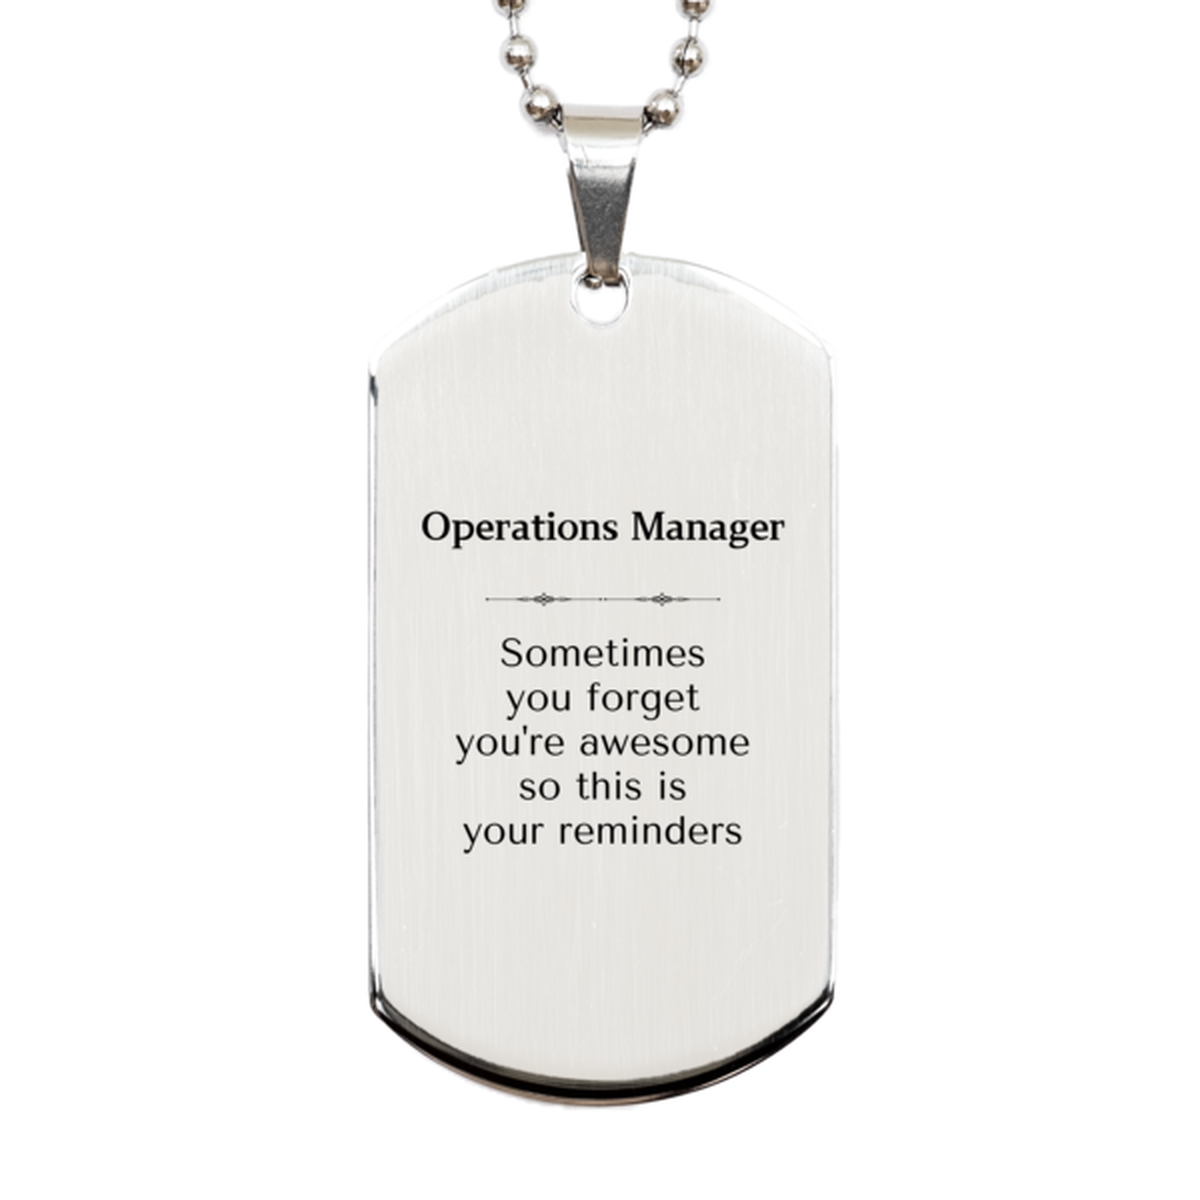 Sentimental Operations Manager Silver Dog Tag, Operations Manager Sometimes you forget you're awesome so this is your reminders, Graduation Christmas Birthday Gifts for Operations Manager, Men, Women, Coworkers